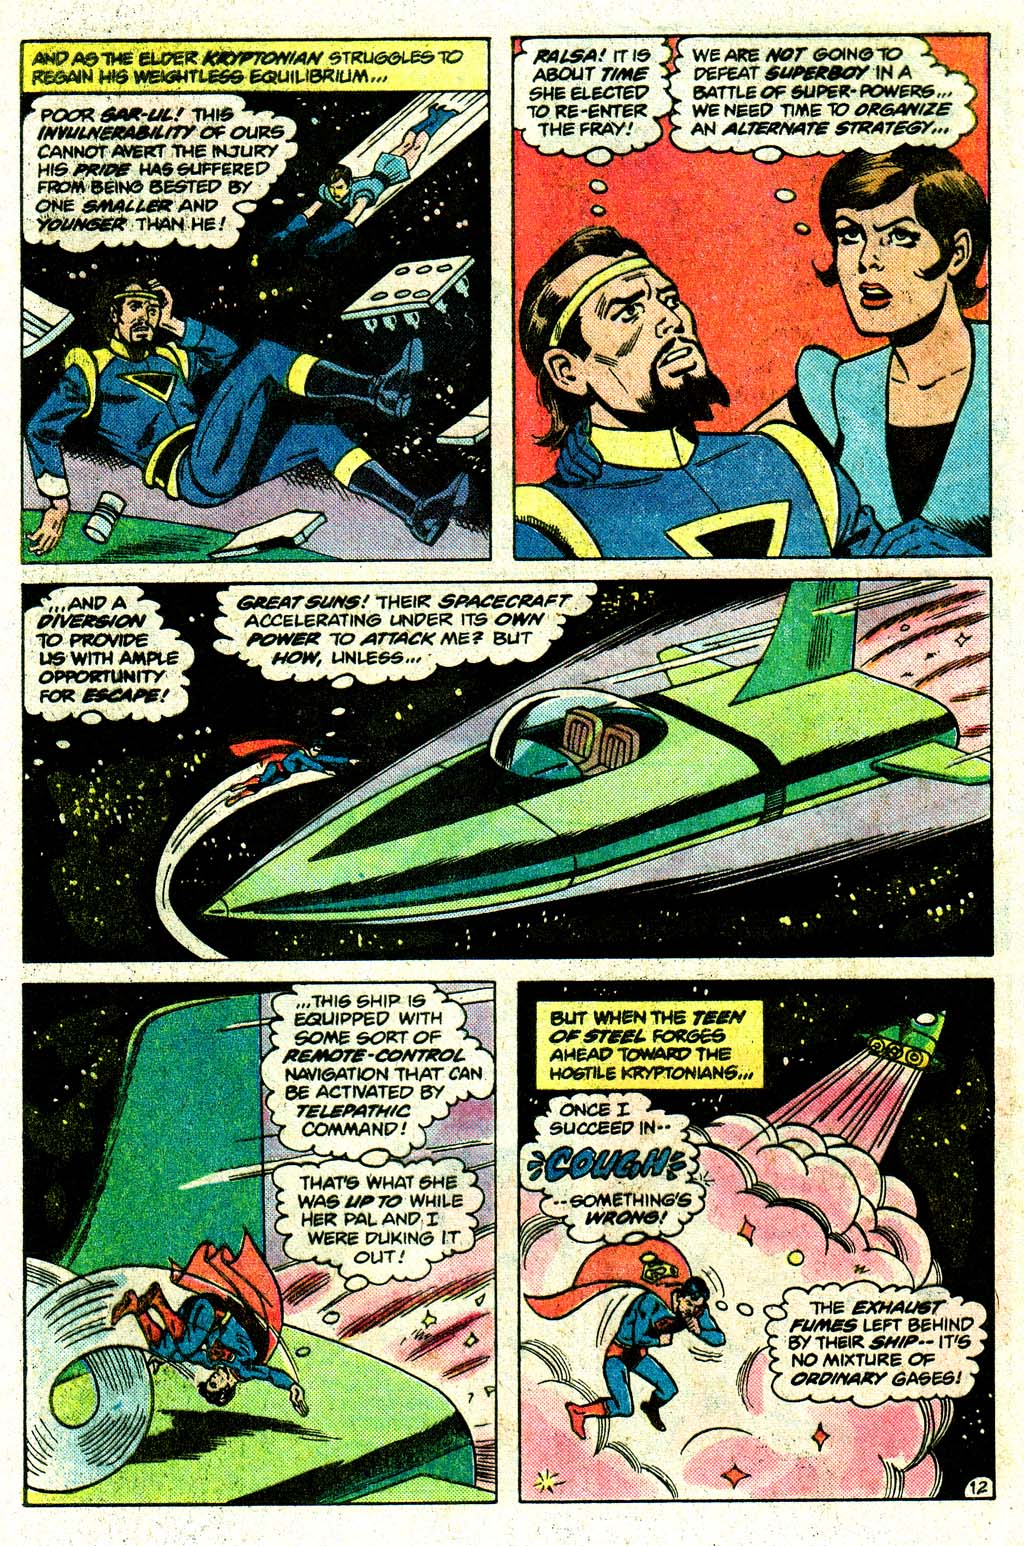 The New Adventures of Superboy 27 Page 15